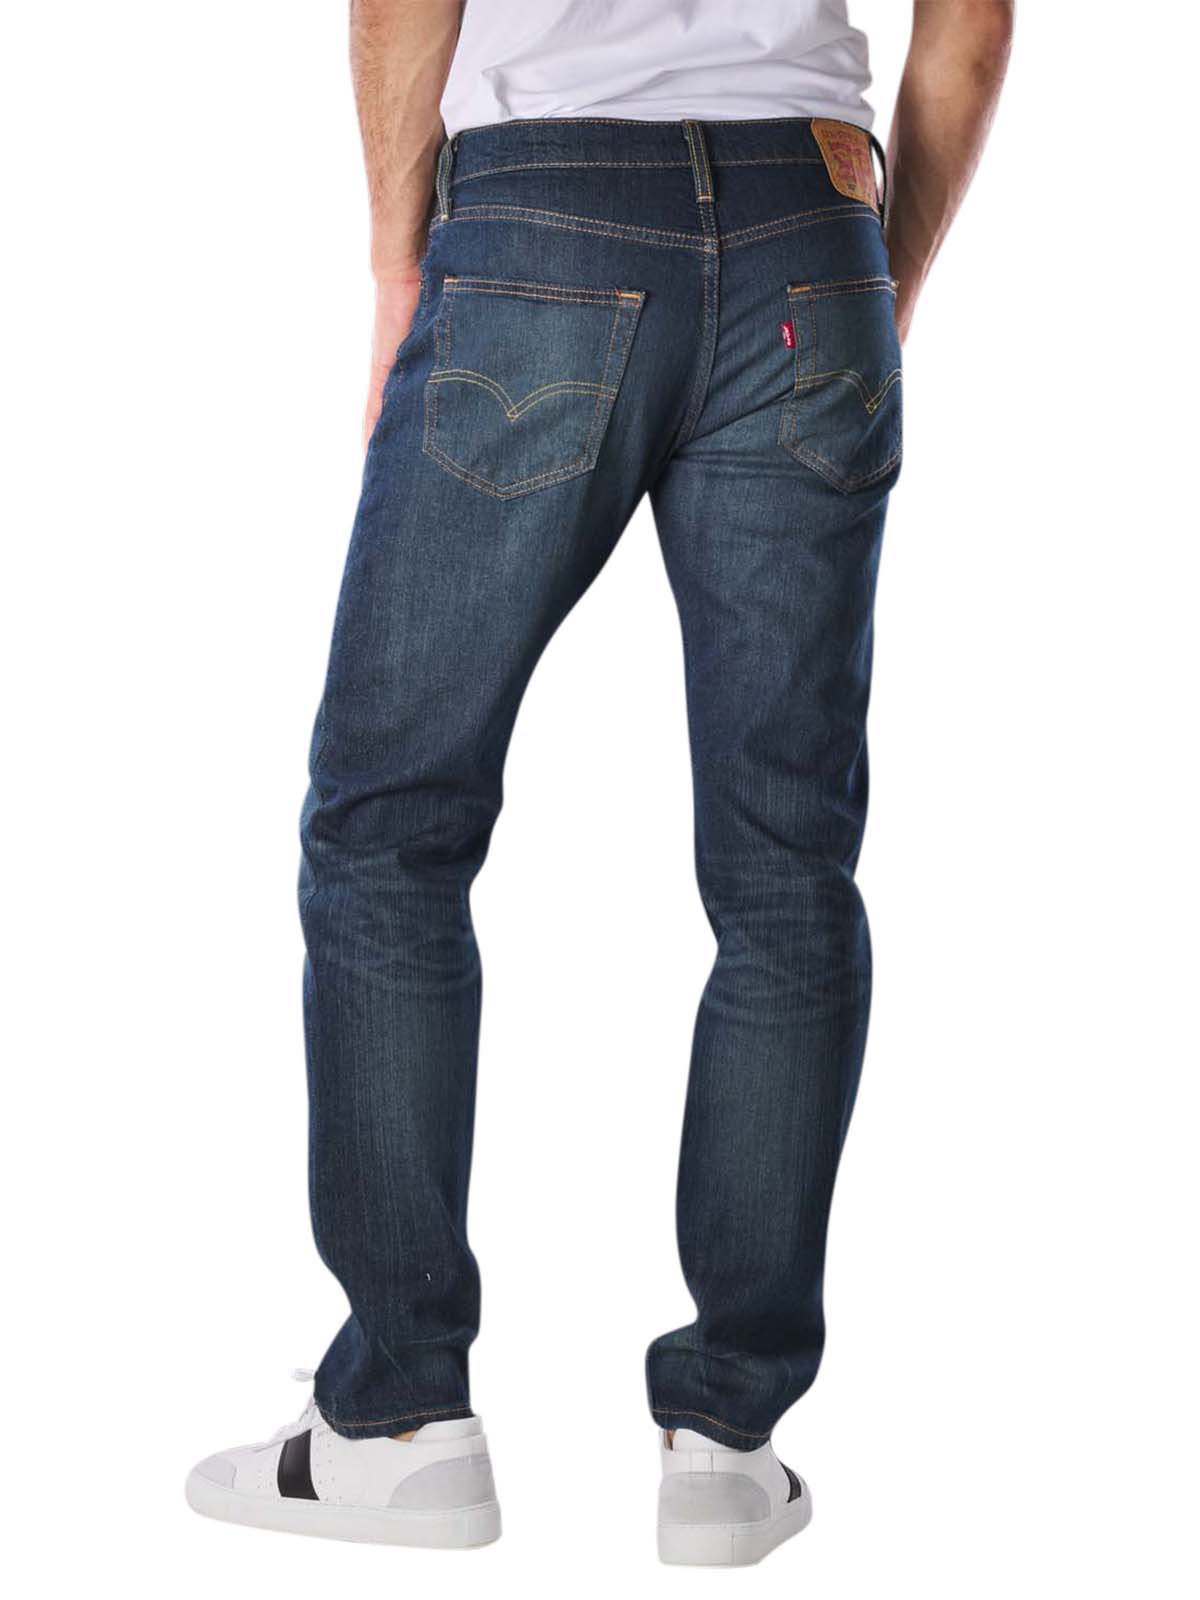 Levi's 502 Jeans Tapered Fit rosefinch Levi's Men's Jeans | Free Shipping  on  - SIMPLY LOOK GOOD